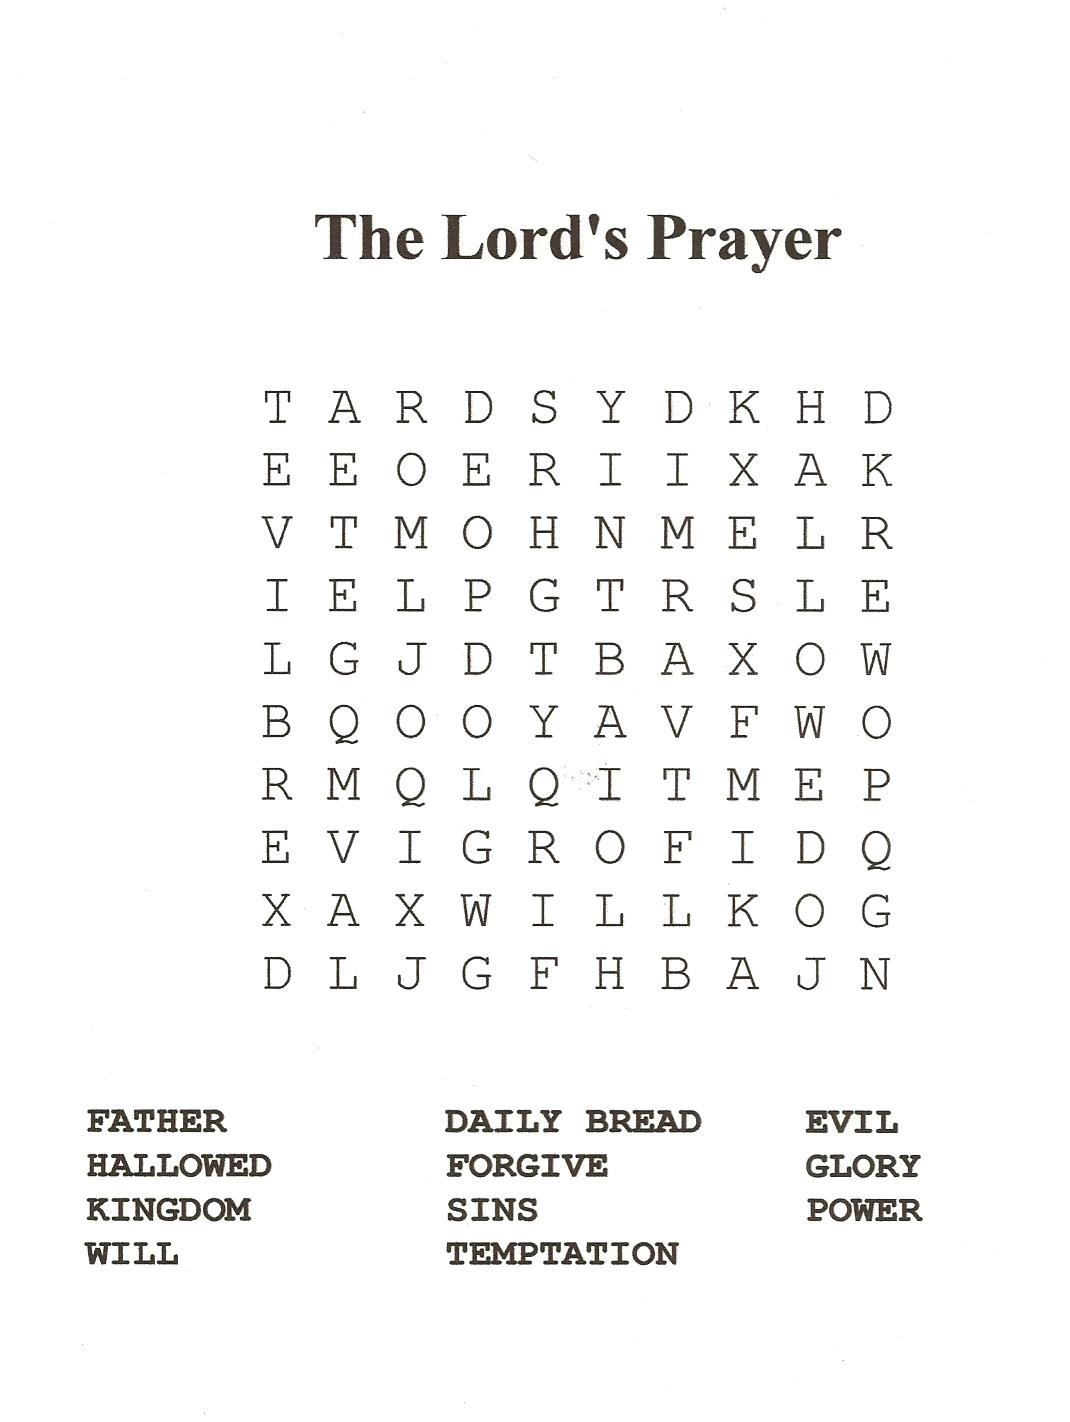 18 Fun Printable Bible Word Search Puzzles | Kittybabylove - Christian Word Search Puzzles Free Printable